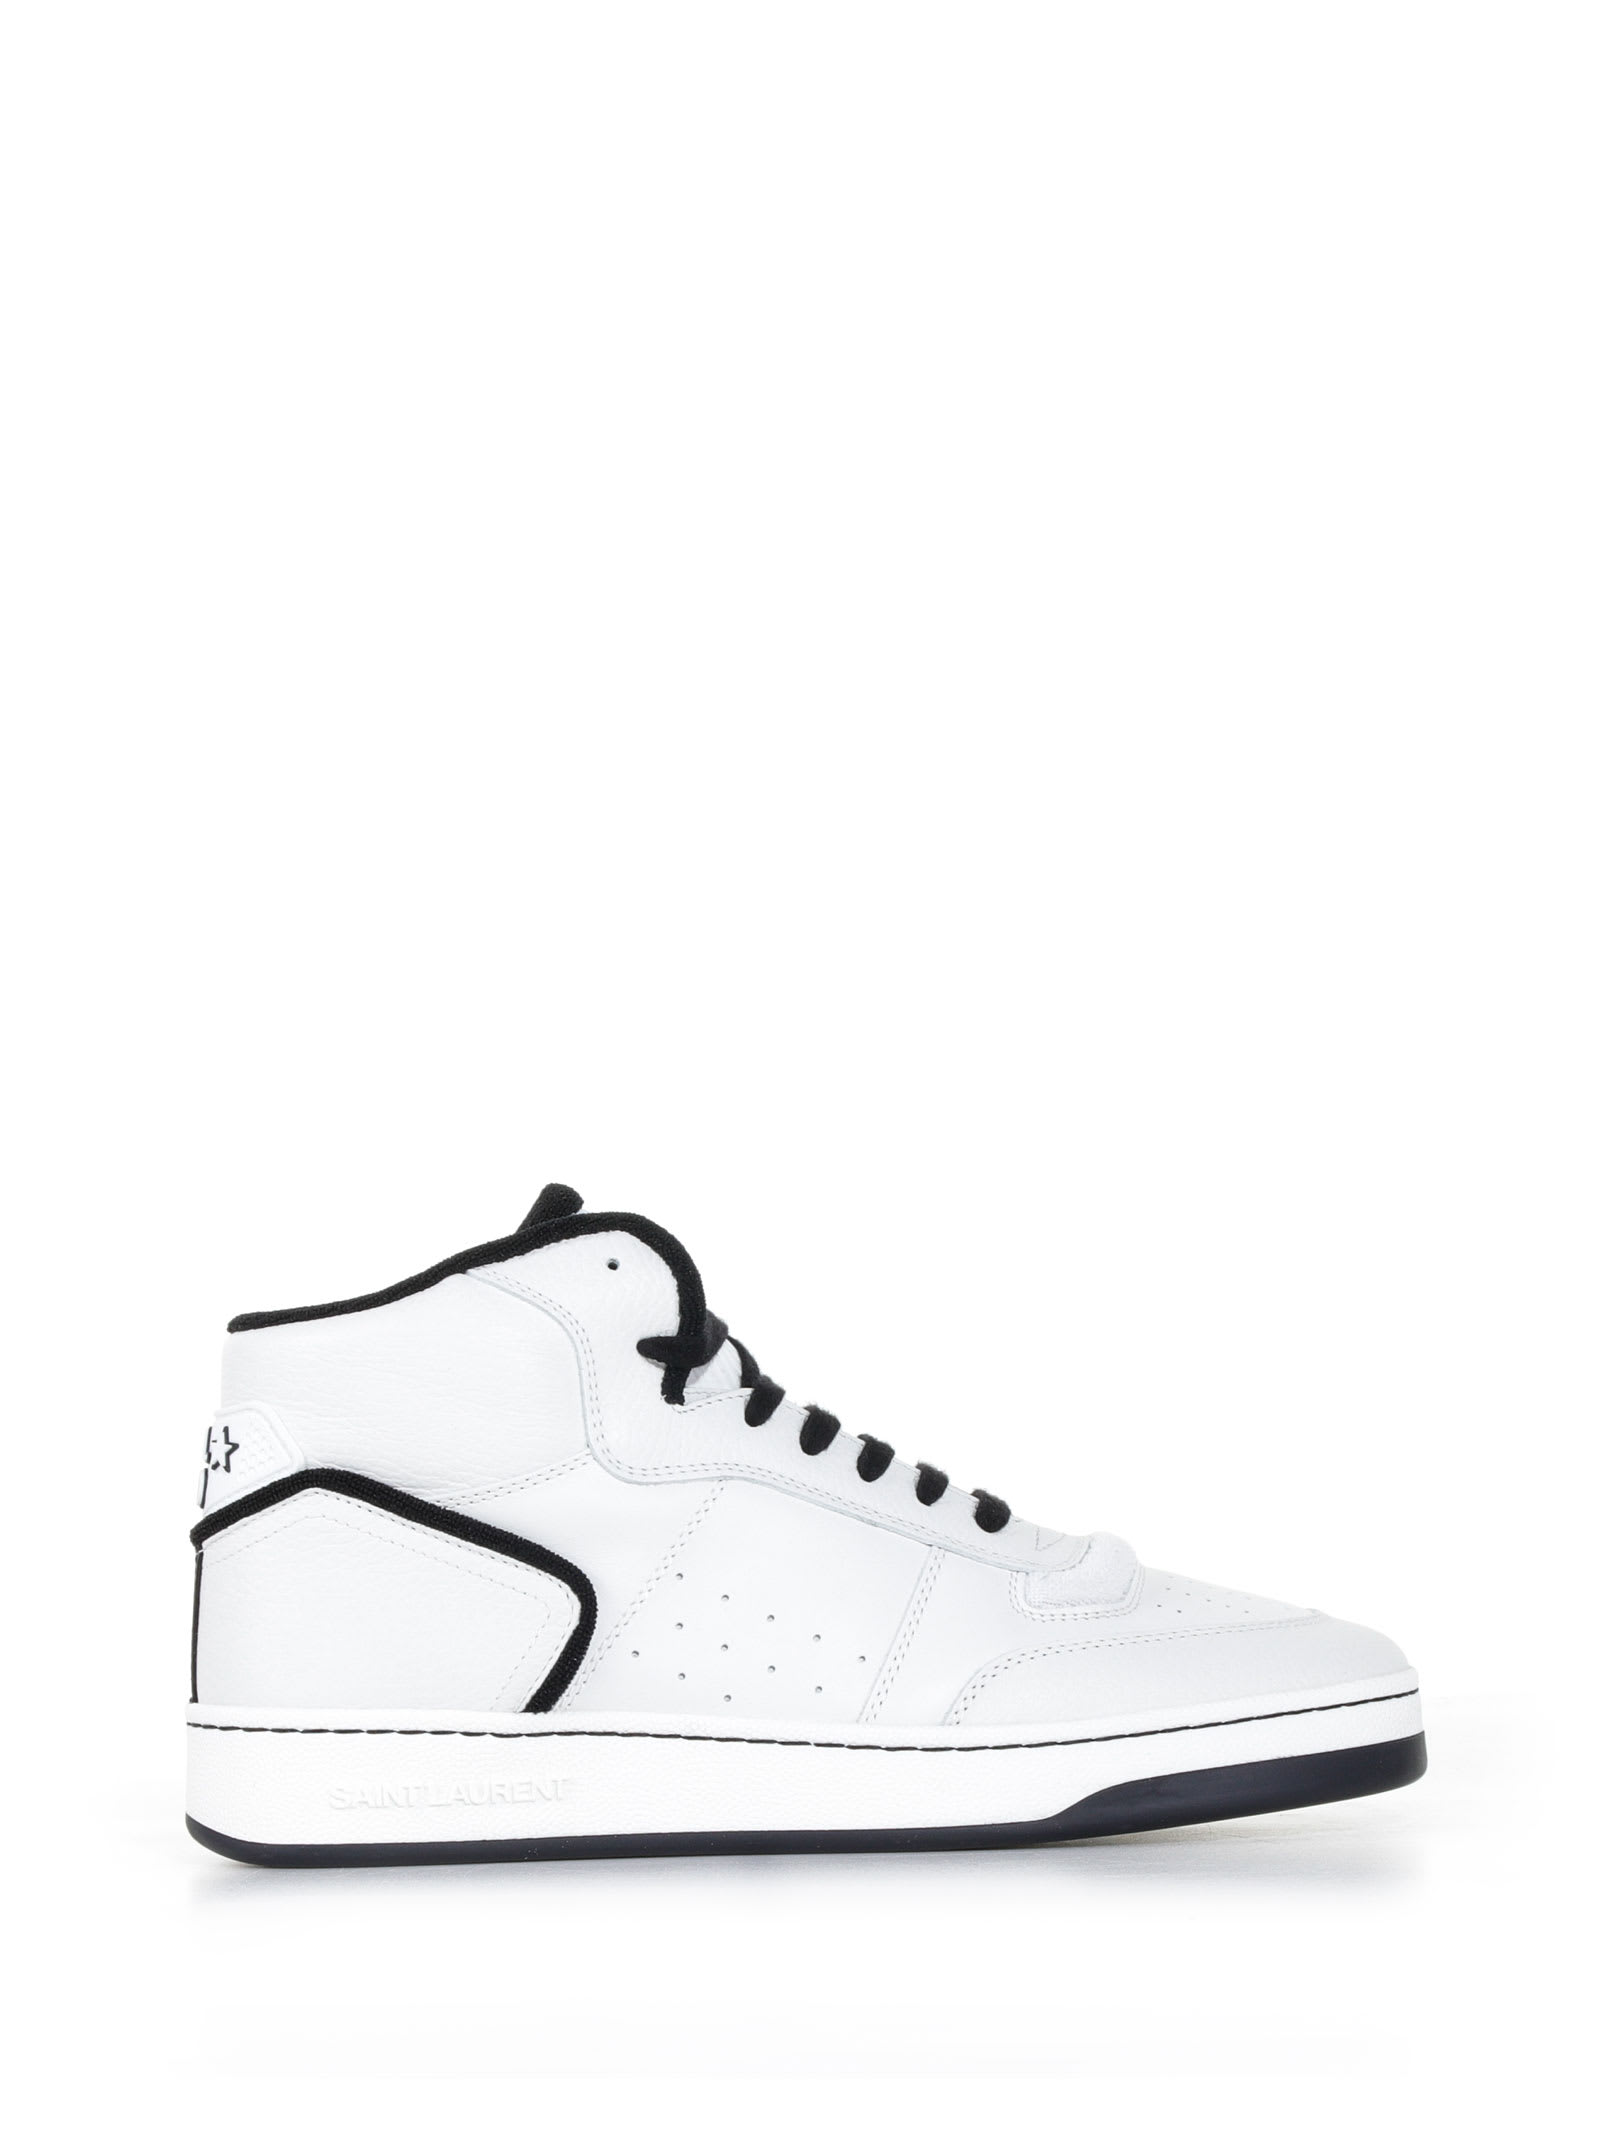 Saint Laurent Sneakers With Contrasting Details In Blanc Opt